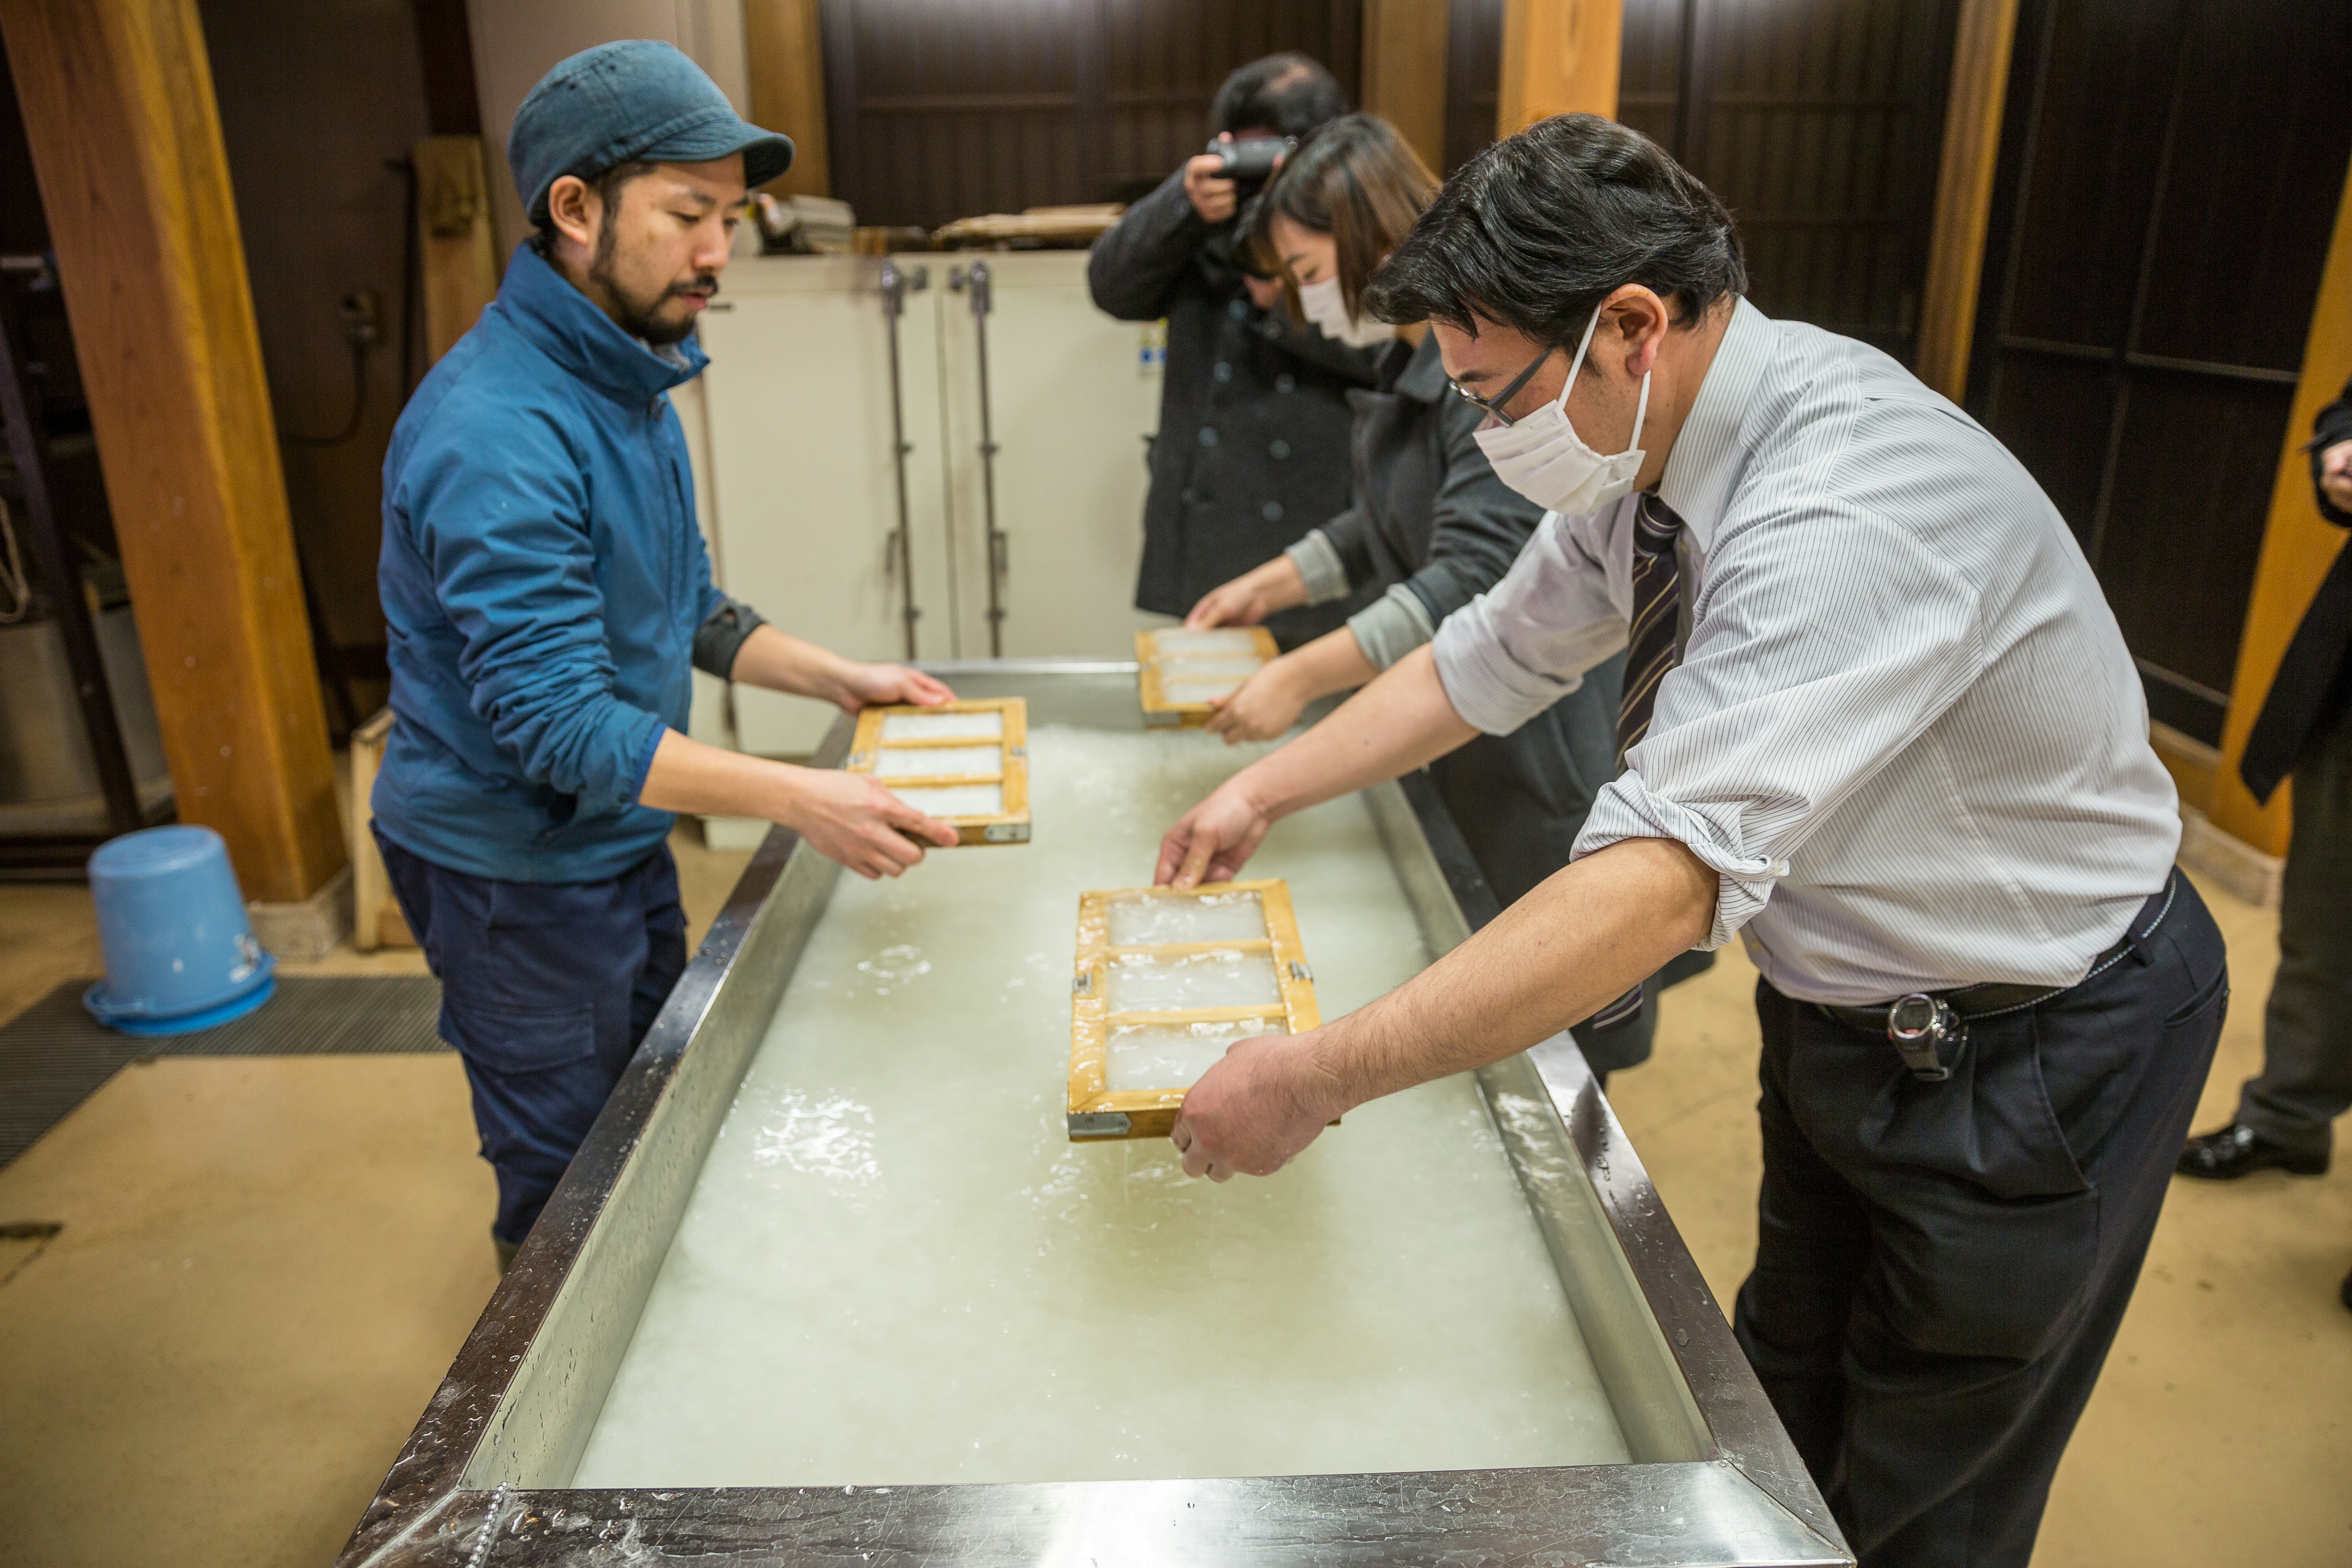 Three people lean over a trough of white liquid holding small wooden frames, which are the traditional tools used in making washi paper